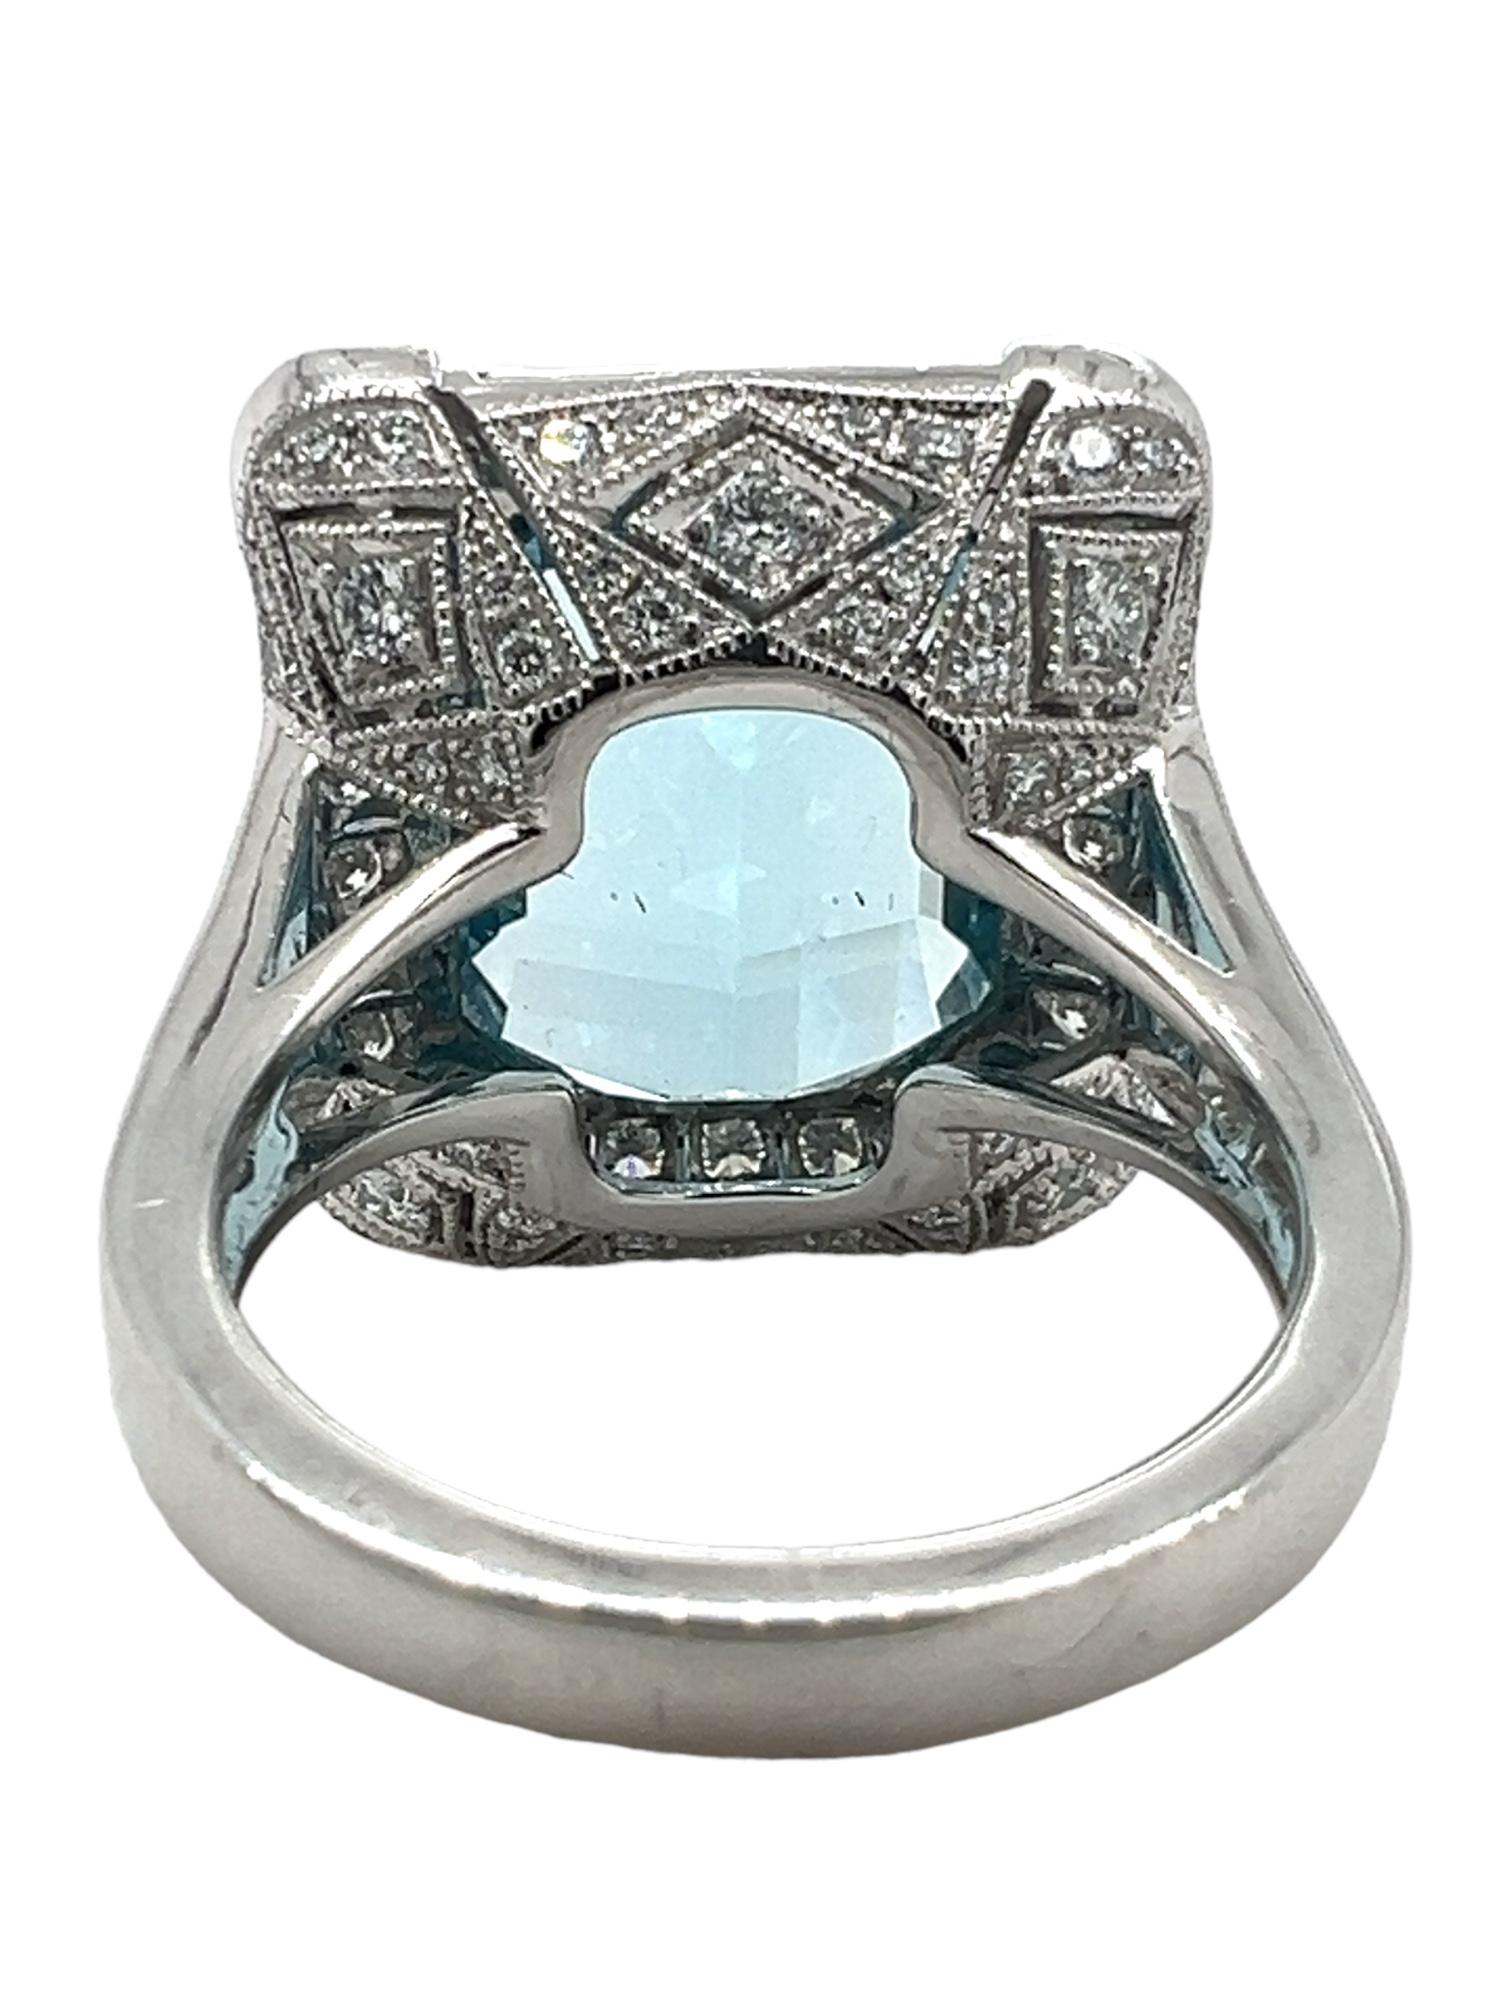 Sophia D. 7.70 Carat Aquamarine Ring In New Condition For Sale In New York, NY